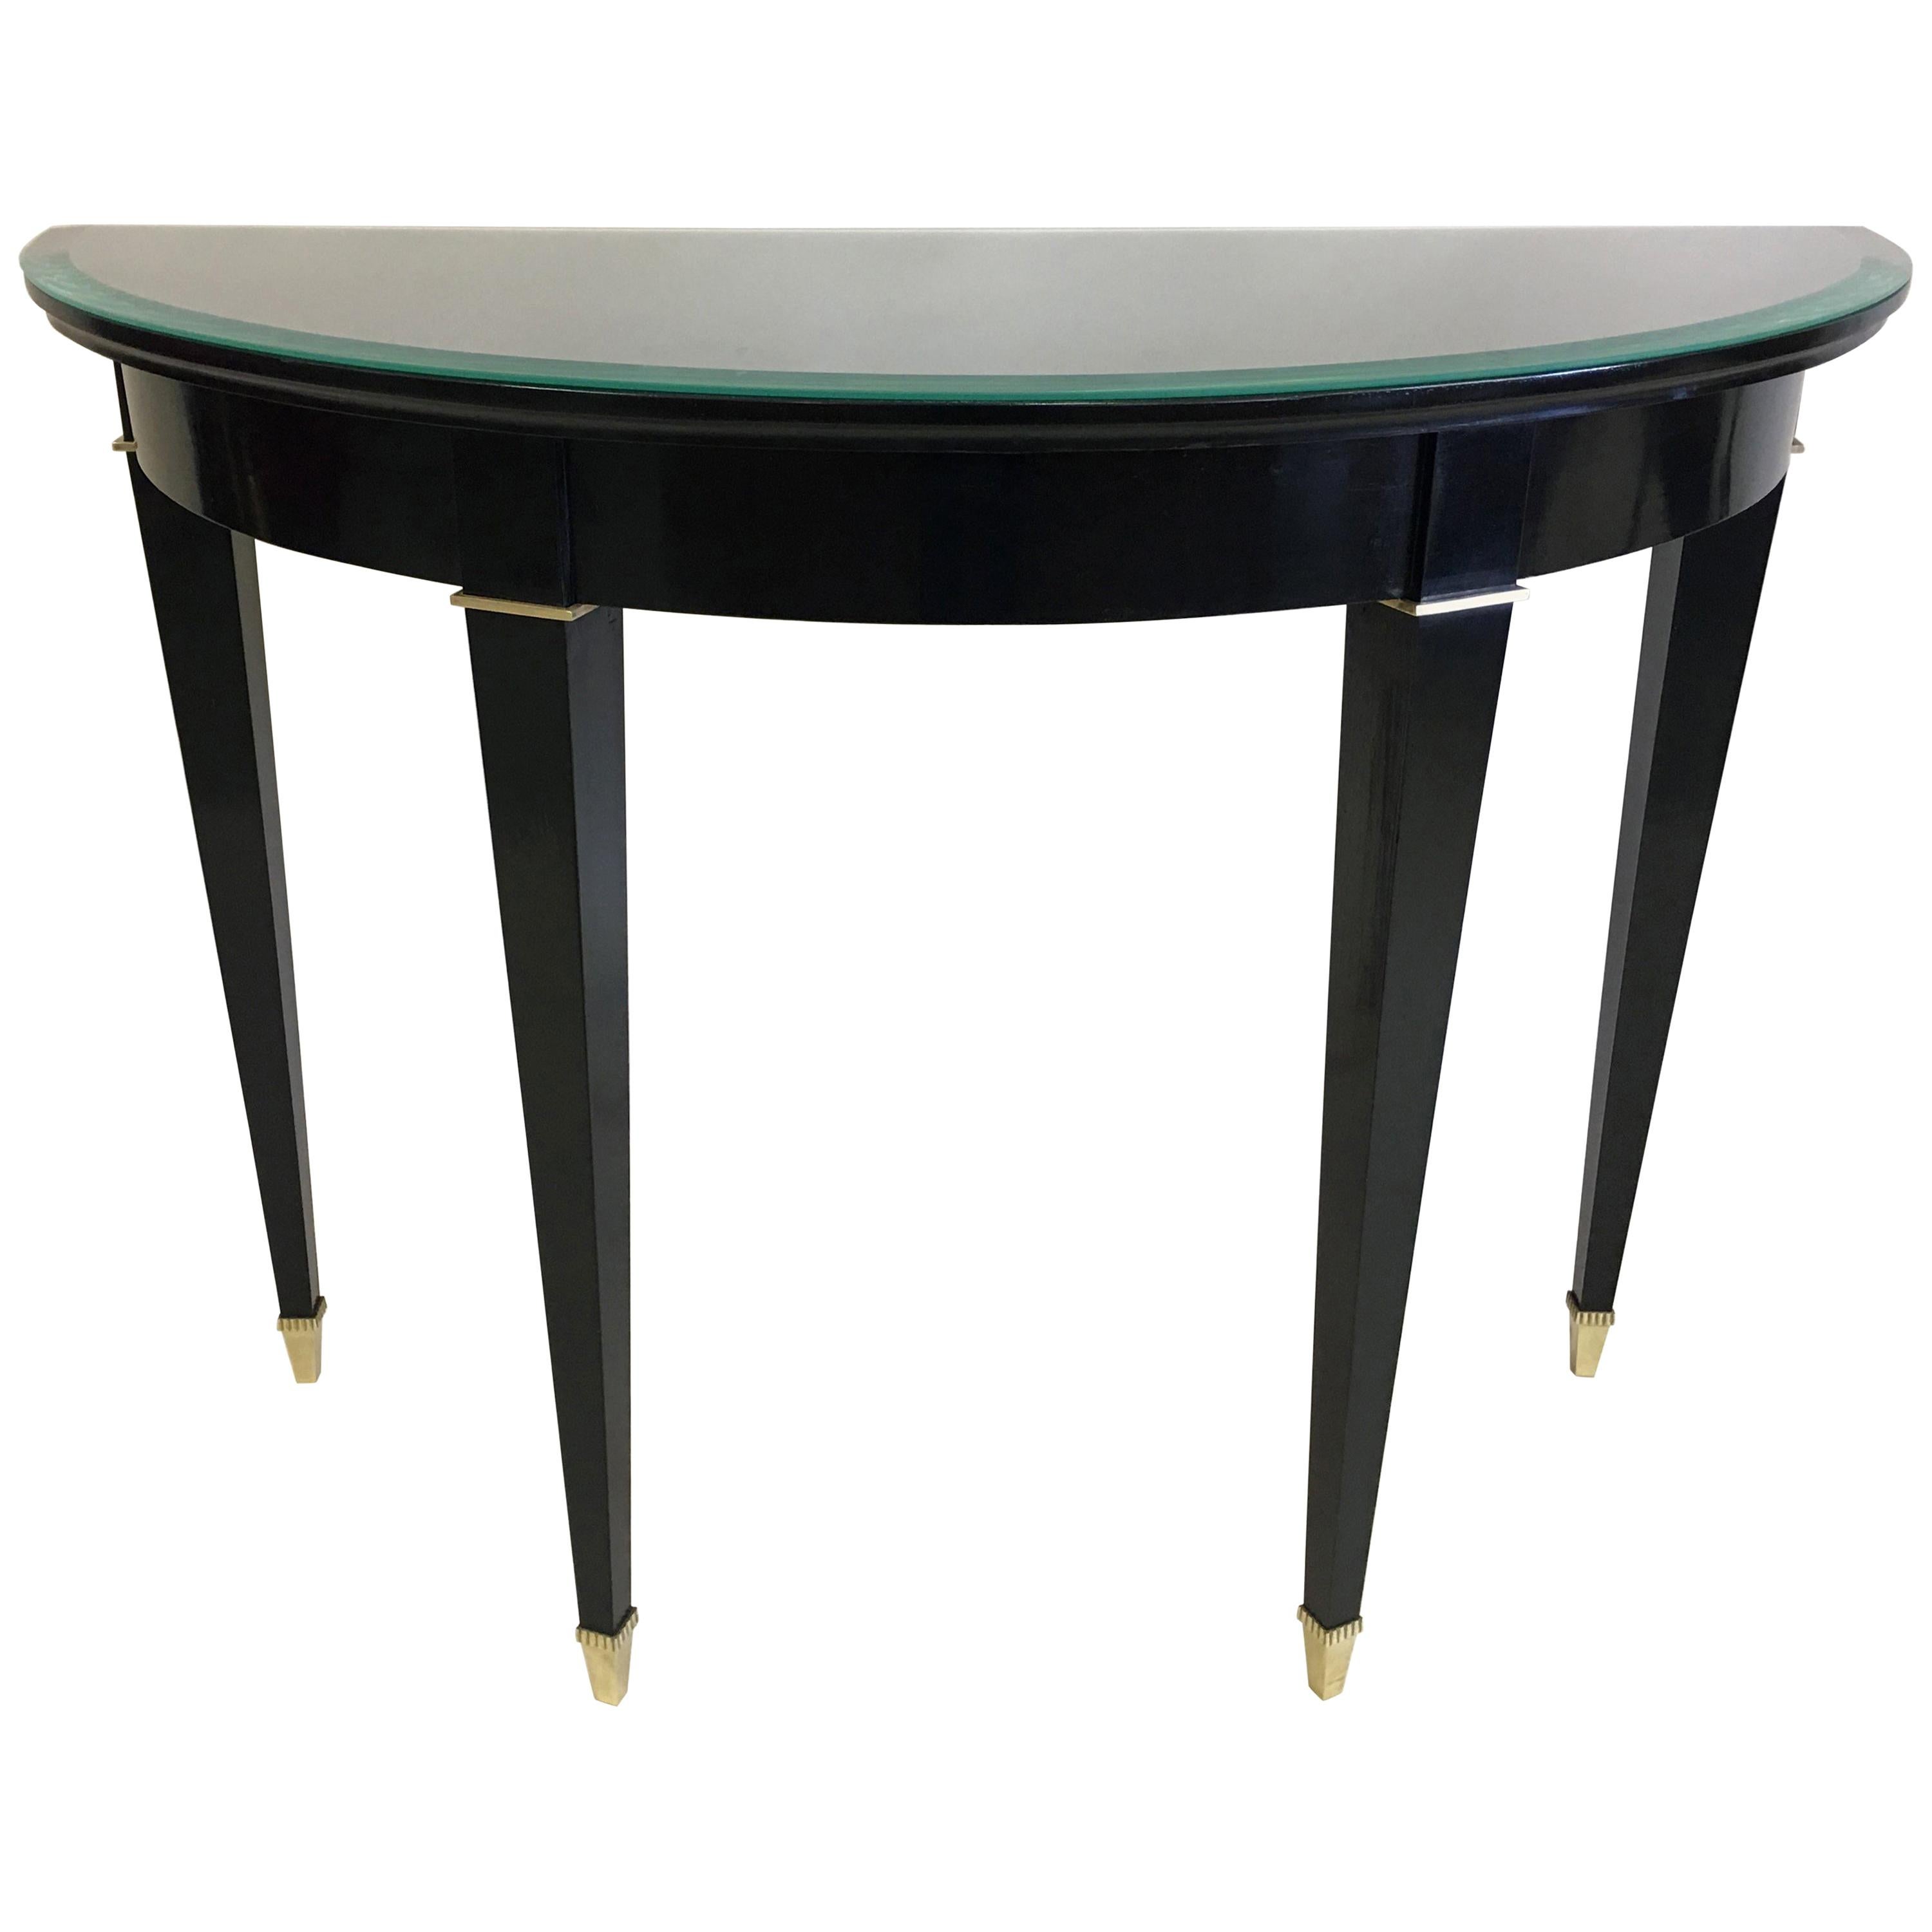 French Modern Neoclassical Black Lacquer Demilune Console by Maison Jansen